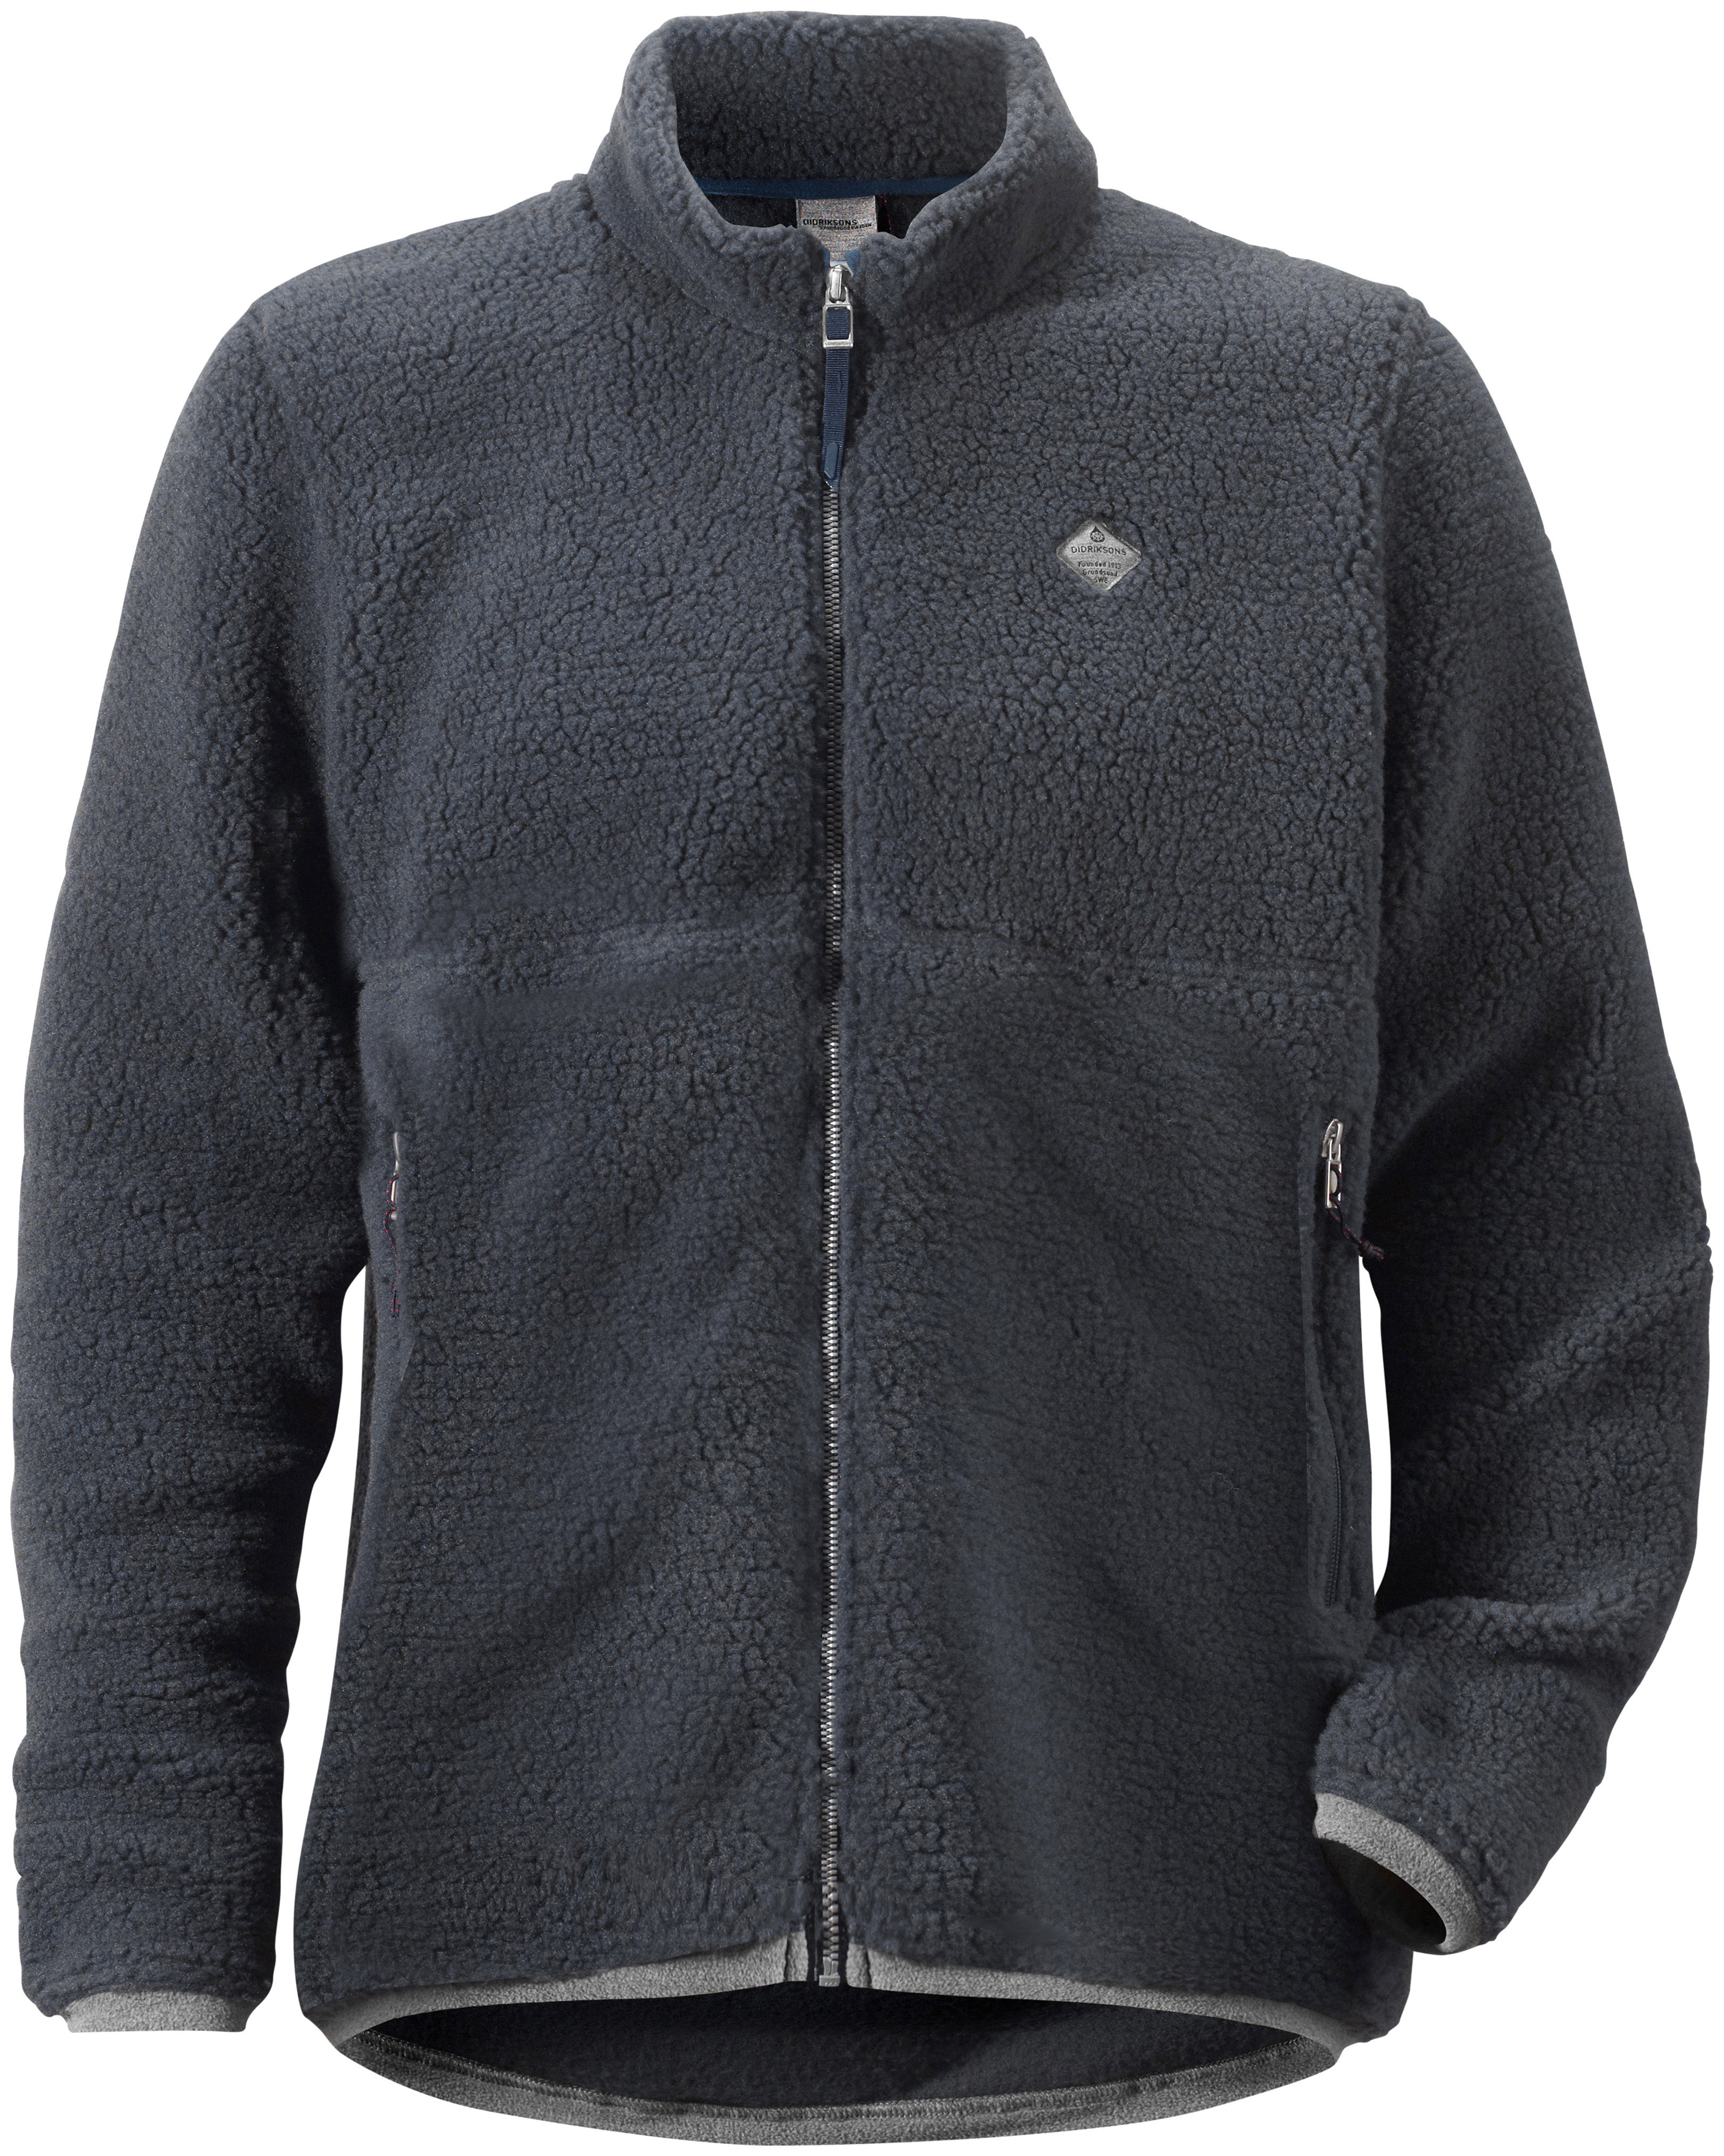 outback_mens_pile_jacket_500626_237_a1520o - Laws of Kirkcudbright